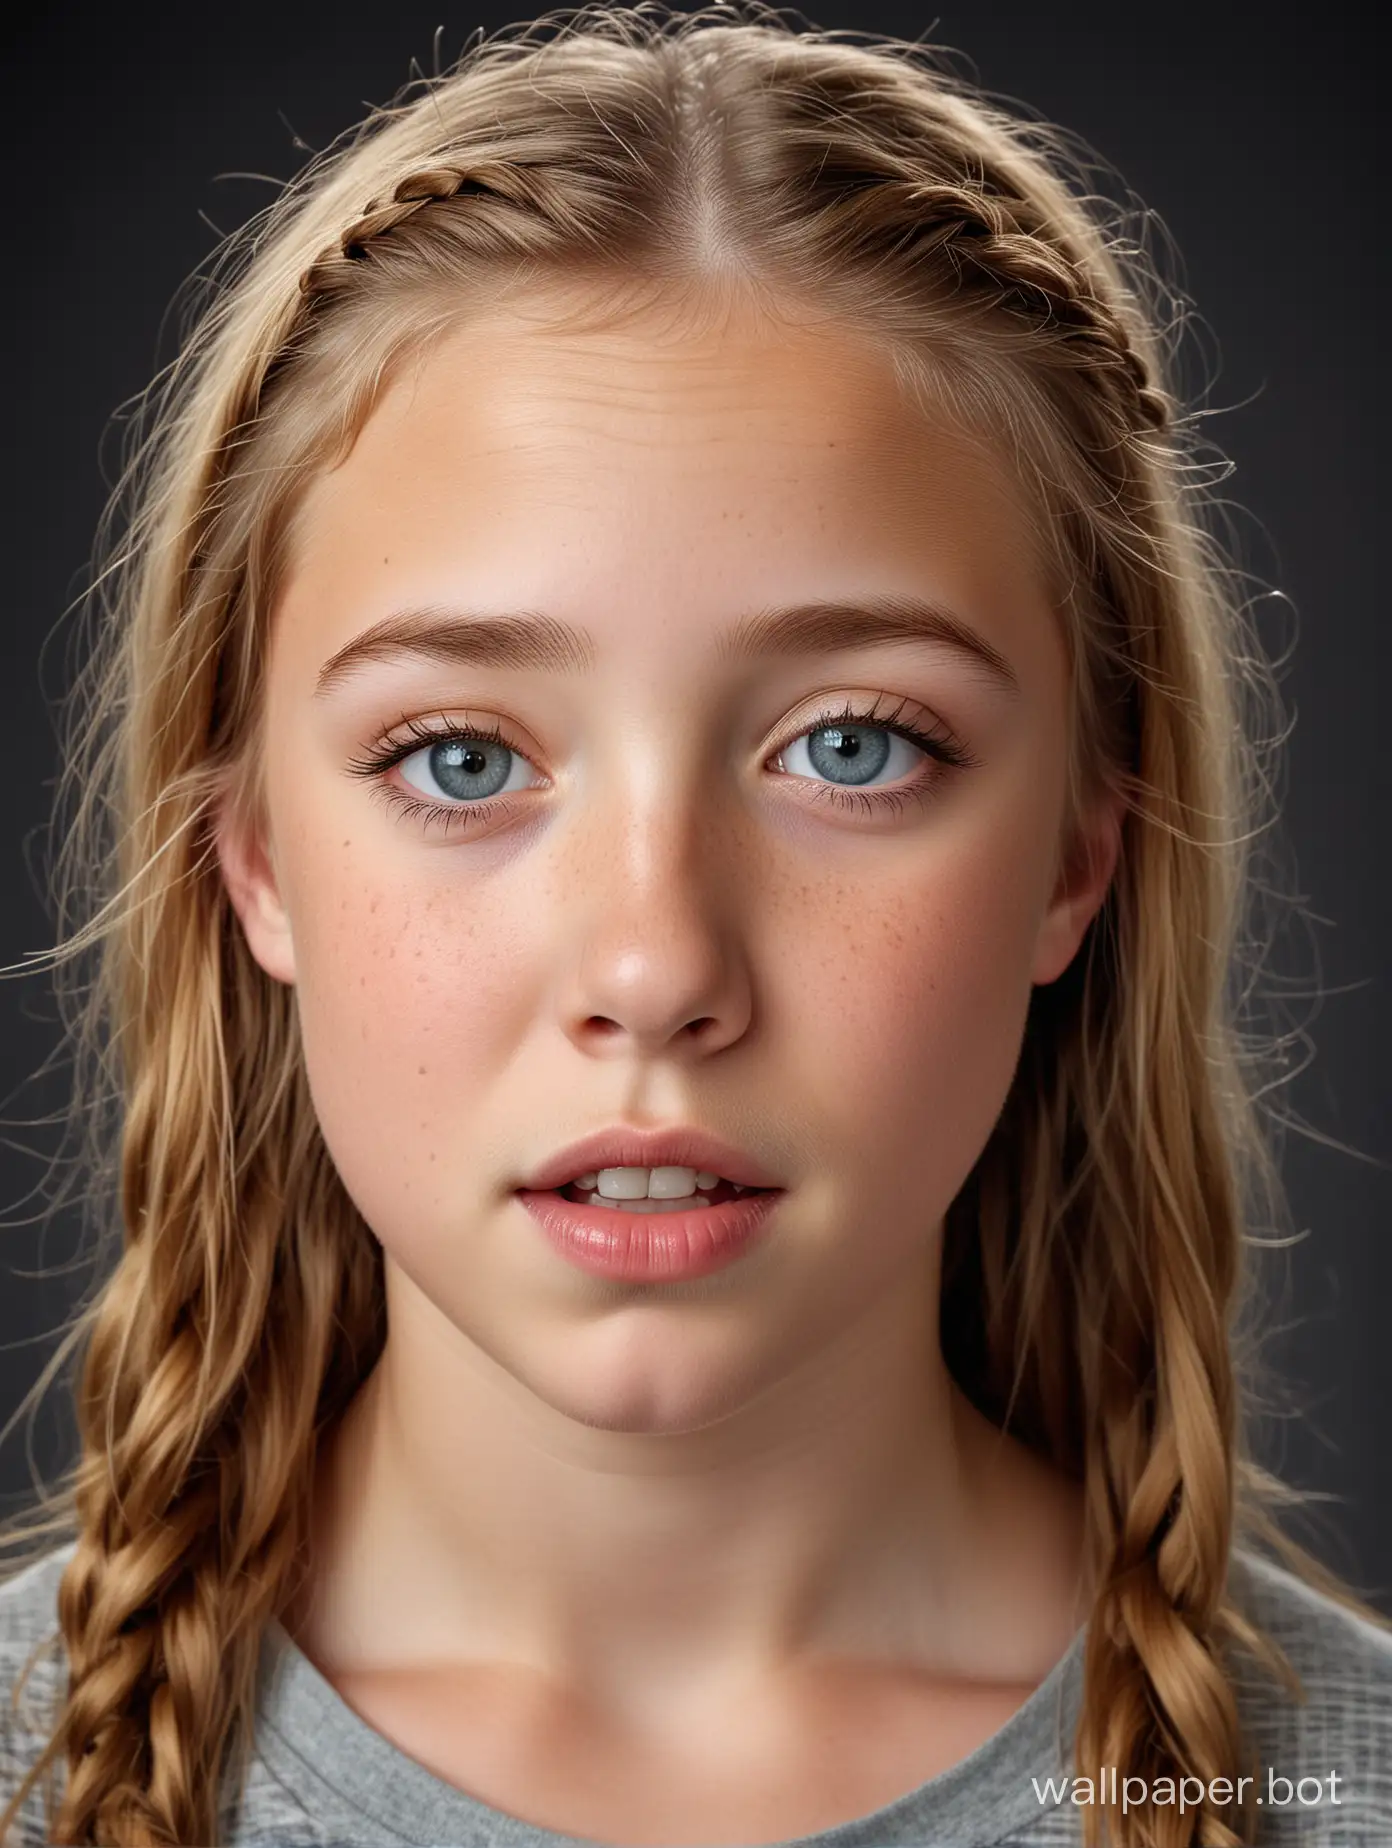 Professional studio portrait photograph with the most intricate detail. A beautiful little 9 year old preteen Caucasian girl. She has a perfect most gorgeous alluring little preteen child face, blue eyes, slight freckles, ginger blonde braided hair. Natural skin. Thin wide mouth with thin lips. She looks almost engelic in her beauty. Surprised confused expression. She has a perfect little preteen child body, short stocky stature, tiniest little flat undeveloped preteen child breasts, puffy nipples, slender waist, round broad hips, curvy thighs.